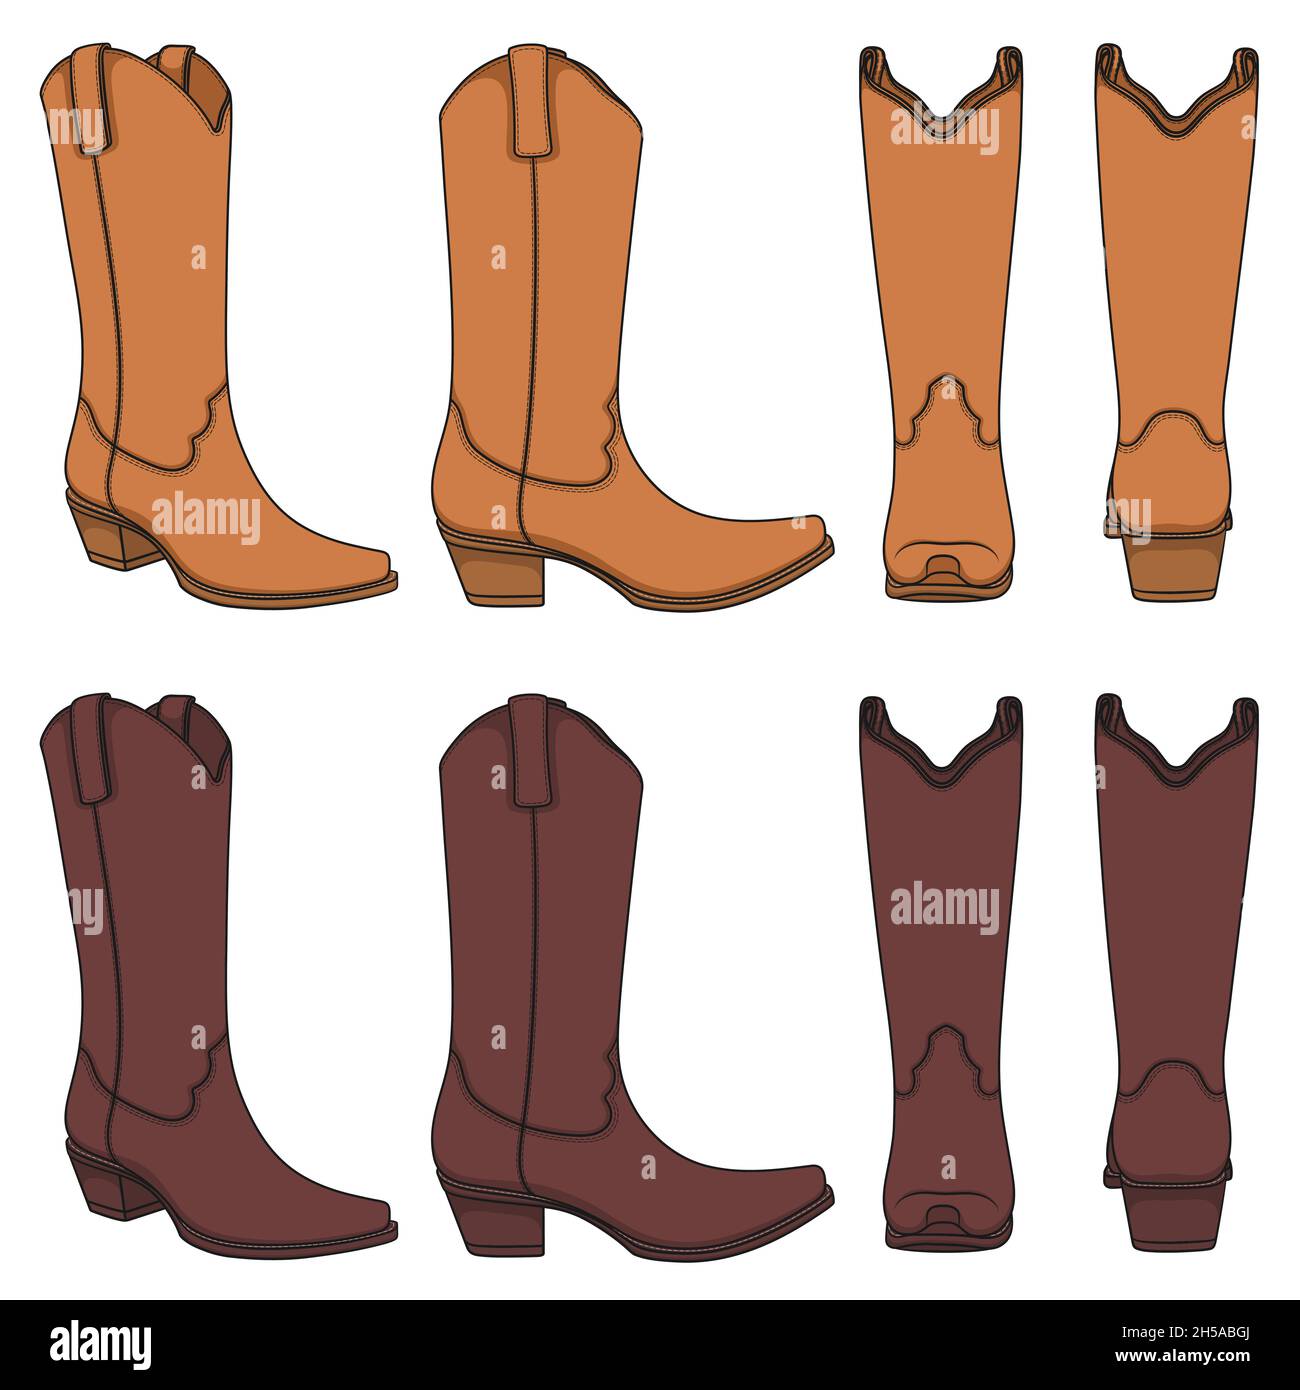 Set of color illustrations with cowboy boots. Isolated vector objects on white background. Stock Vector